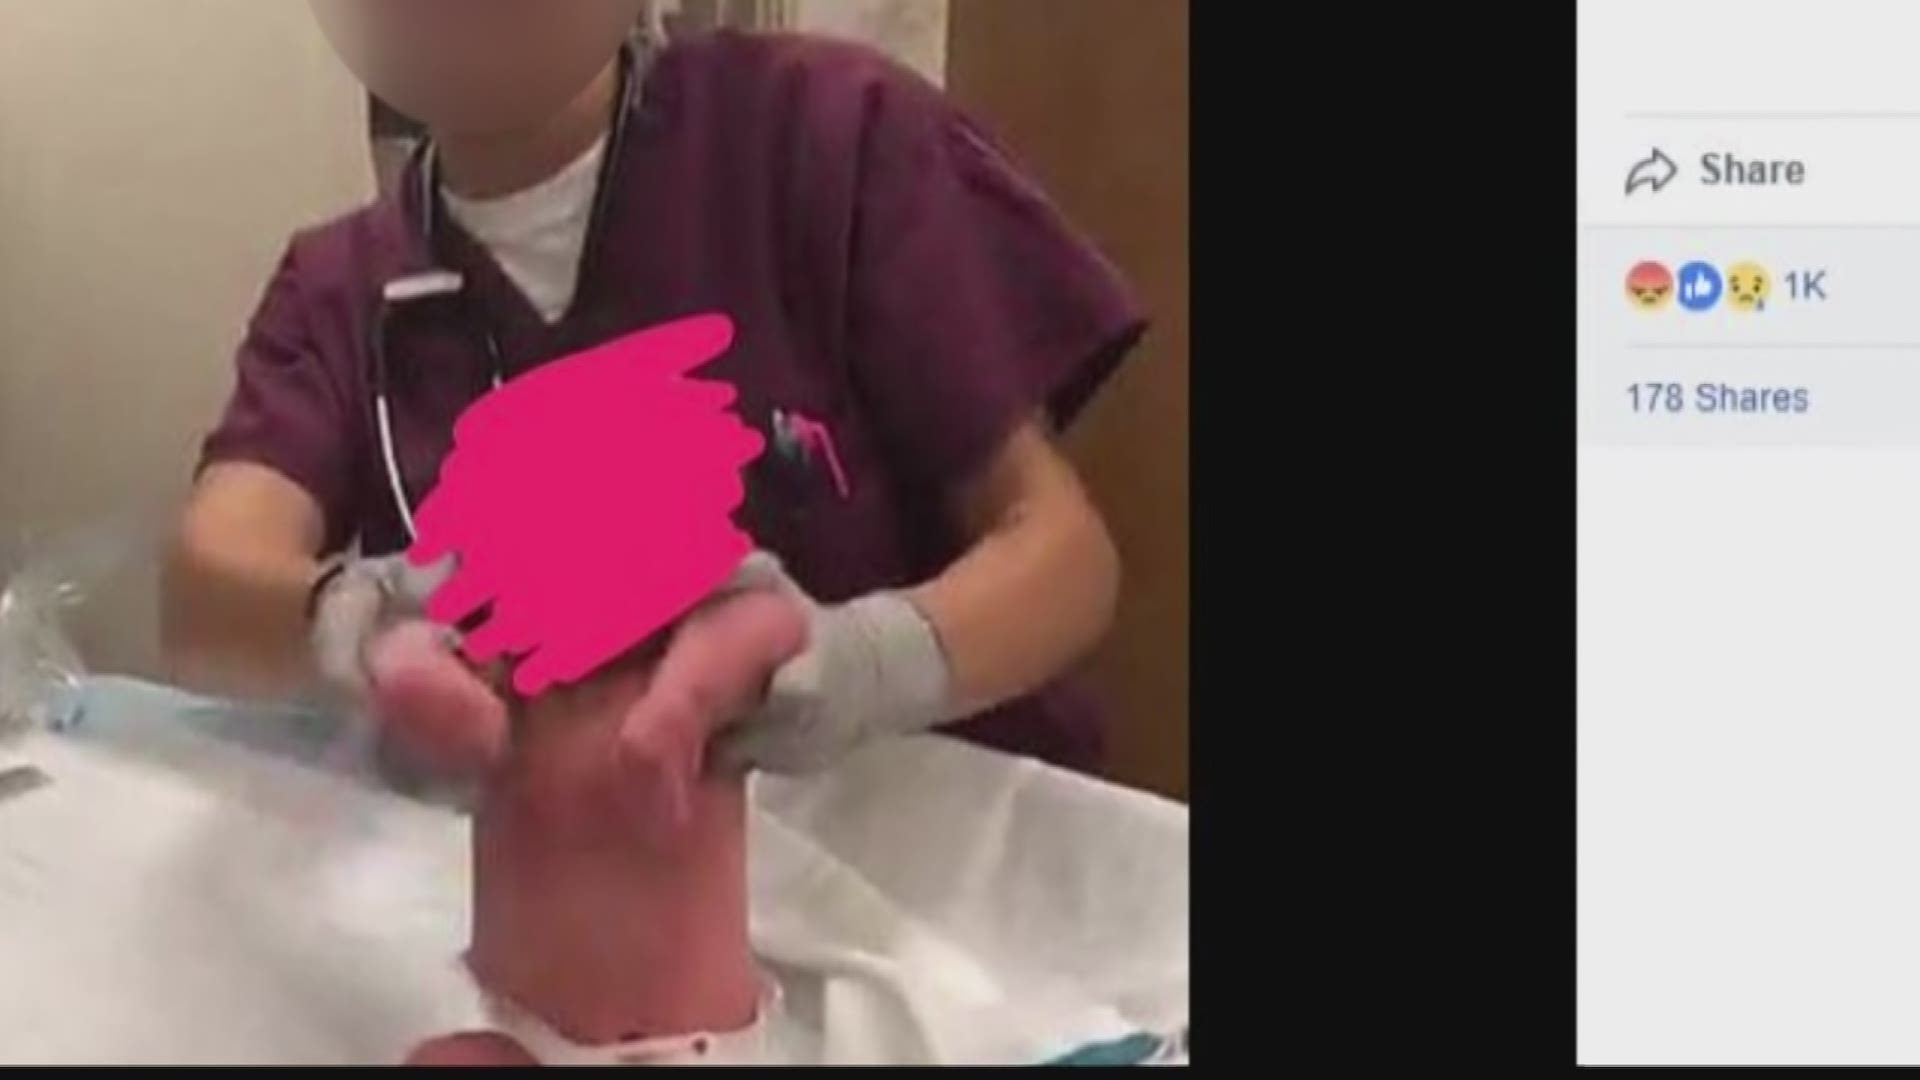 First Coast News continues to investigate photos and social media posts made by Naval hospital nurses who were taunting newborn babies and making them dance to music.